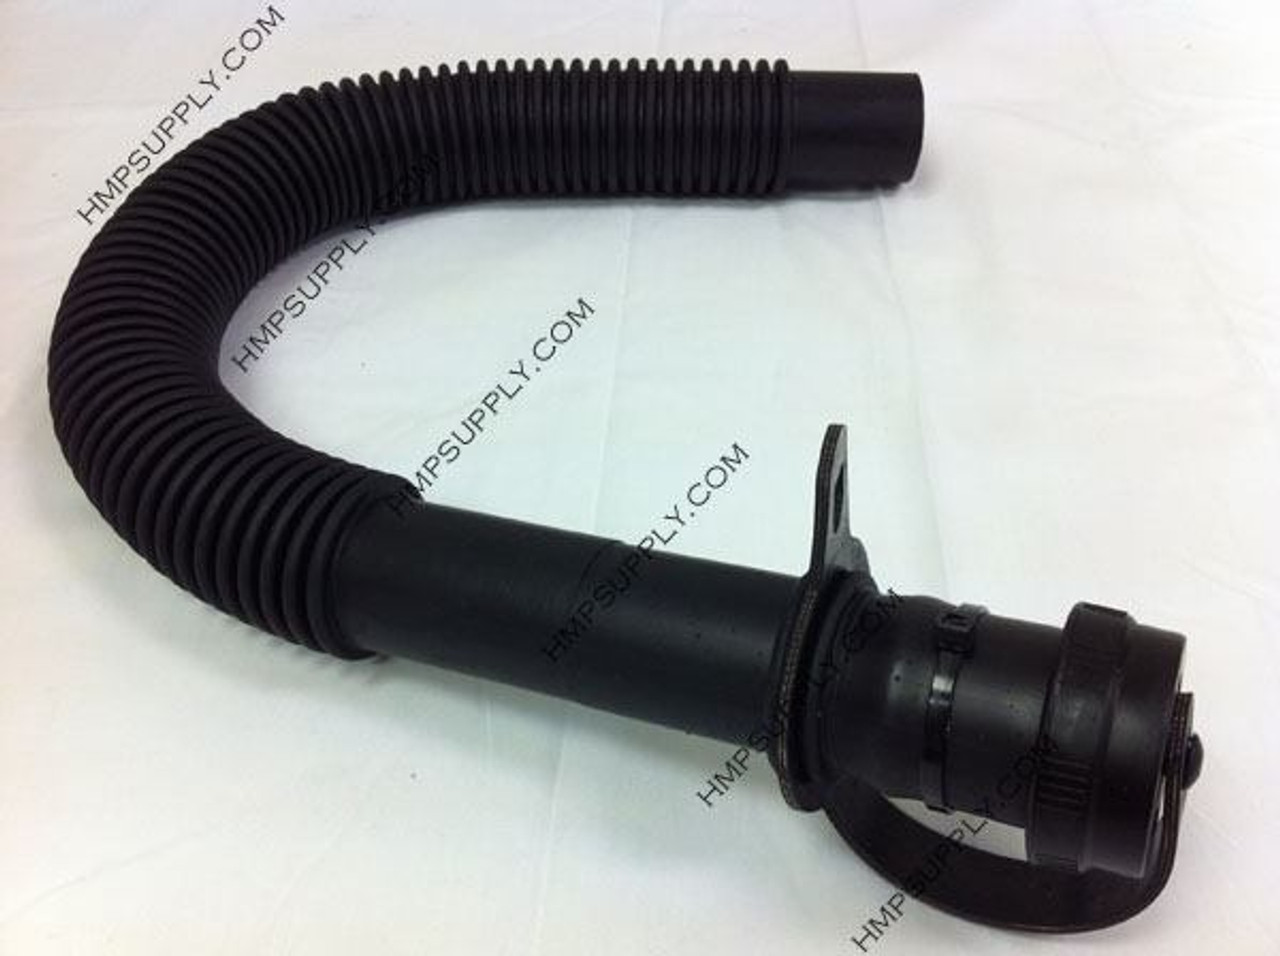 TN 1011167 27" Recovery Tank Drain Hose Assembly with Cuffs for Tennant Scrubbers